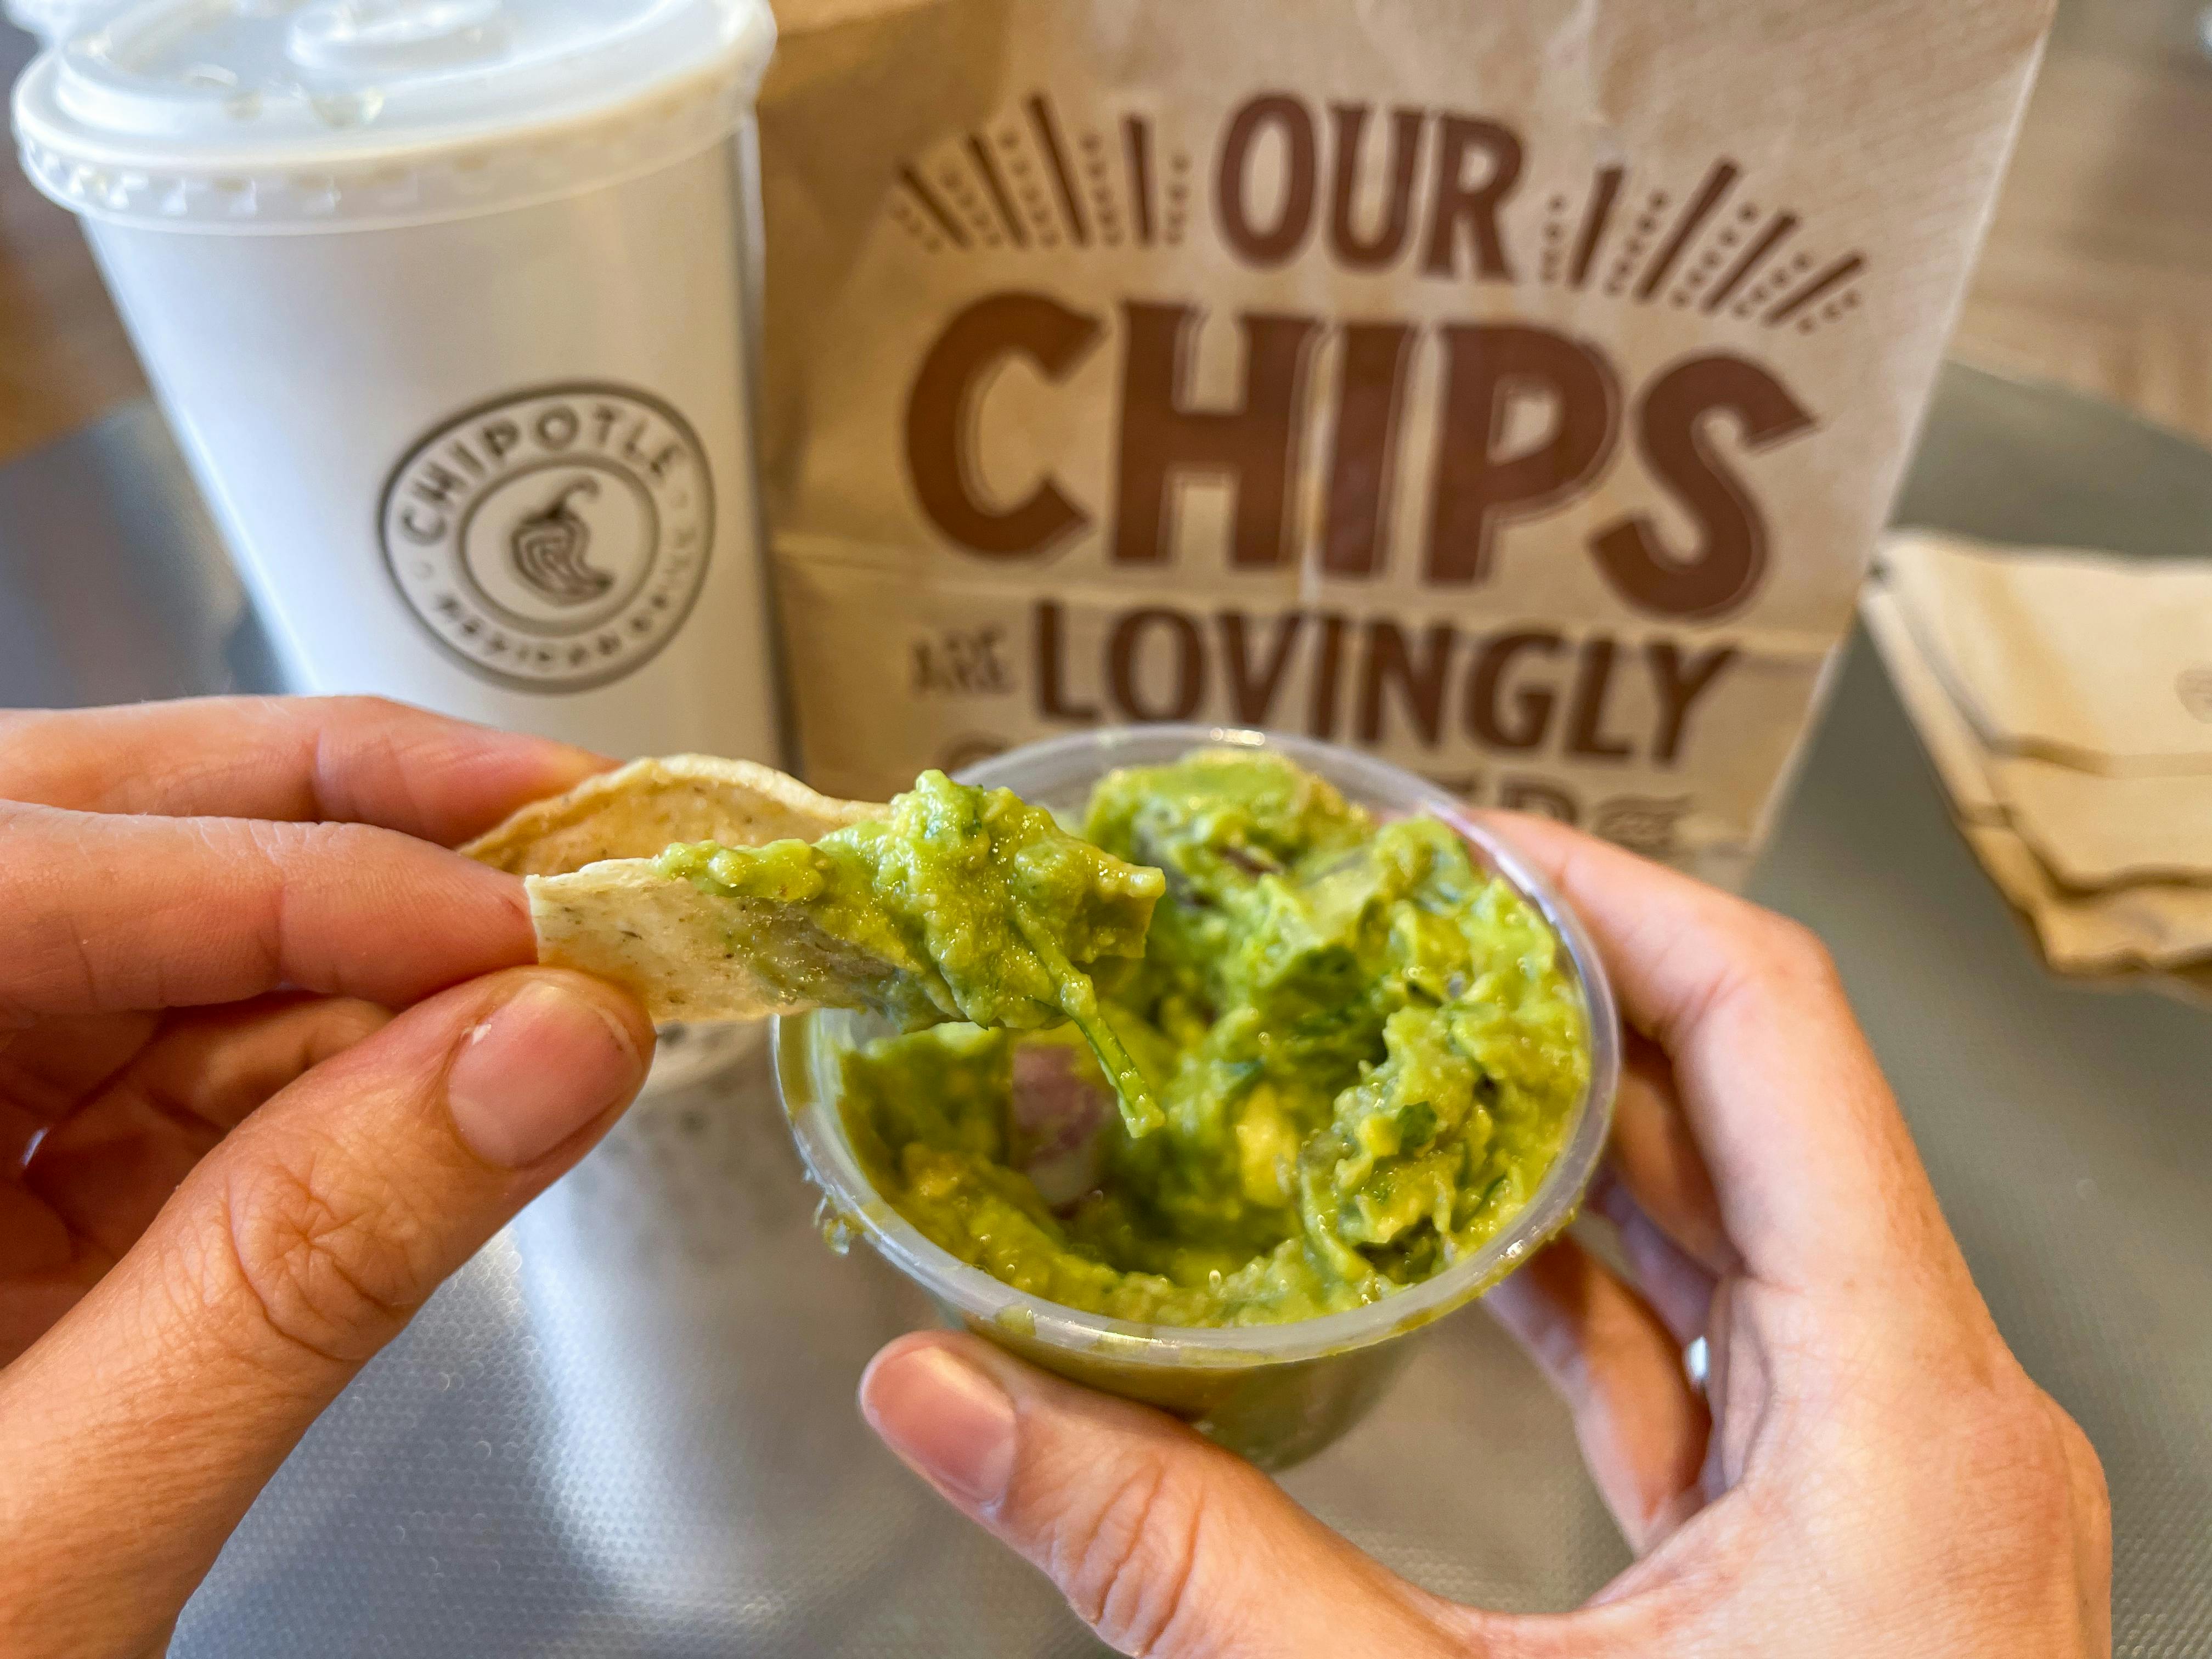 24 Best Chipotle Hacks and Rewards for Free Chipotle - The Krazy Coupon Lady